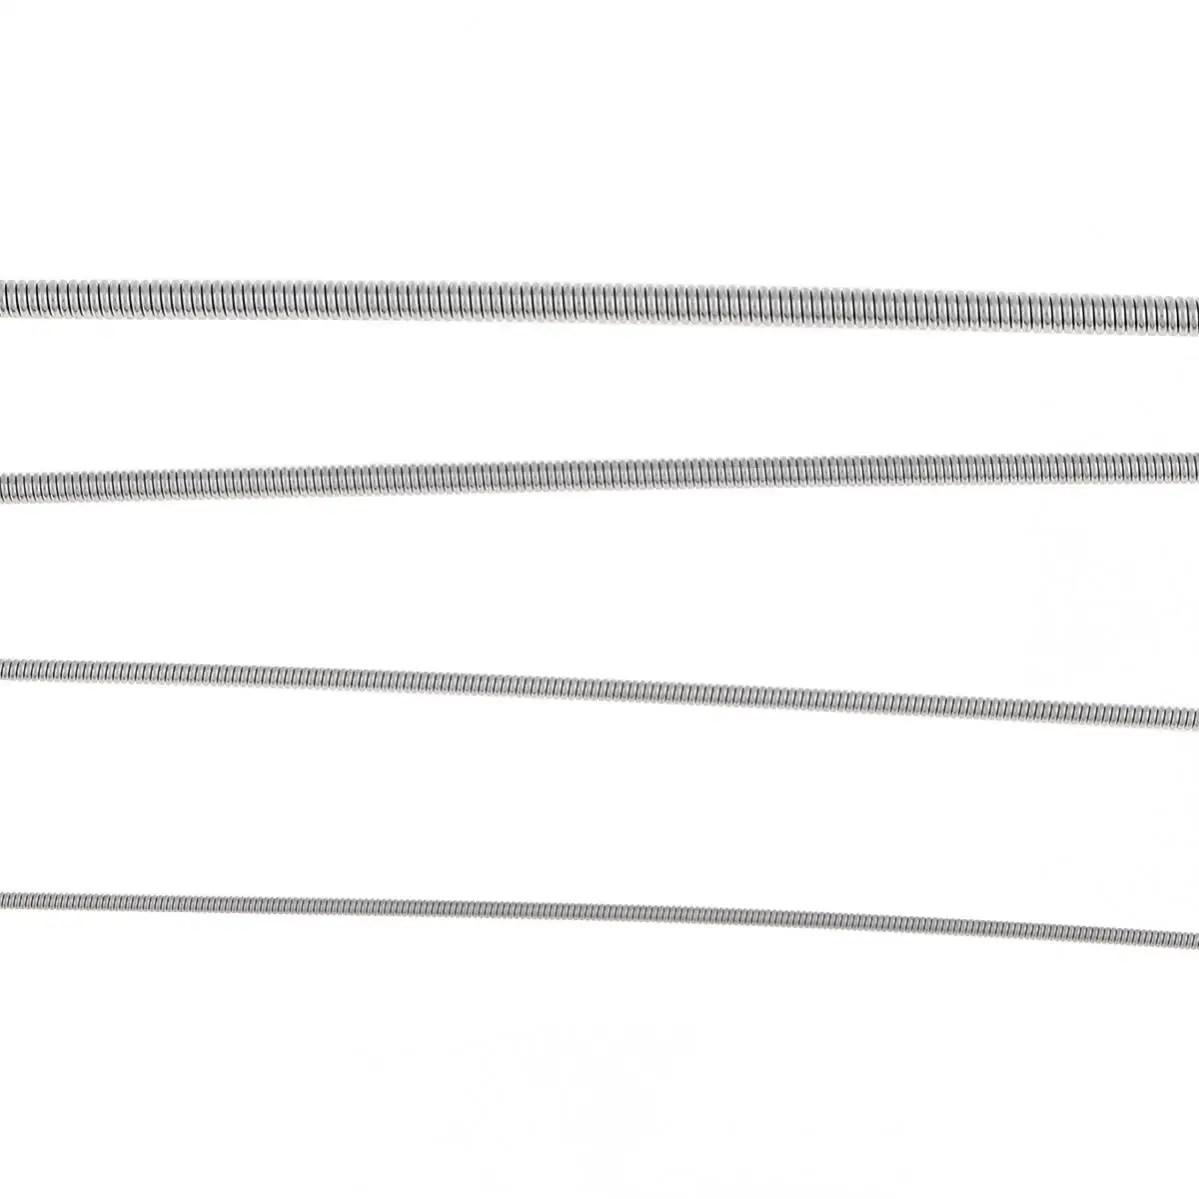 1 Set Bass Strings Steel Cord 040 057 079 100 Nickel-plated Alloy 4 Strings Electric Bass Guitar Parts Musical Instruments